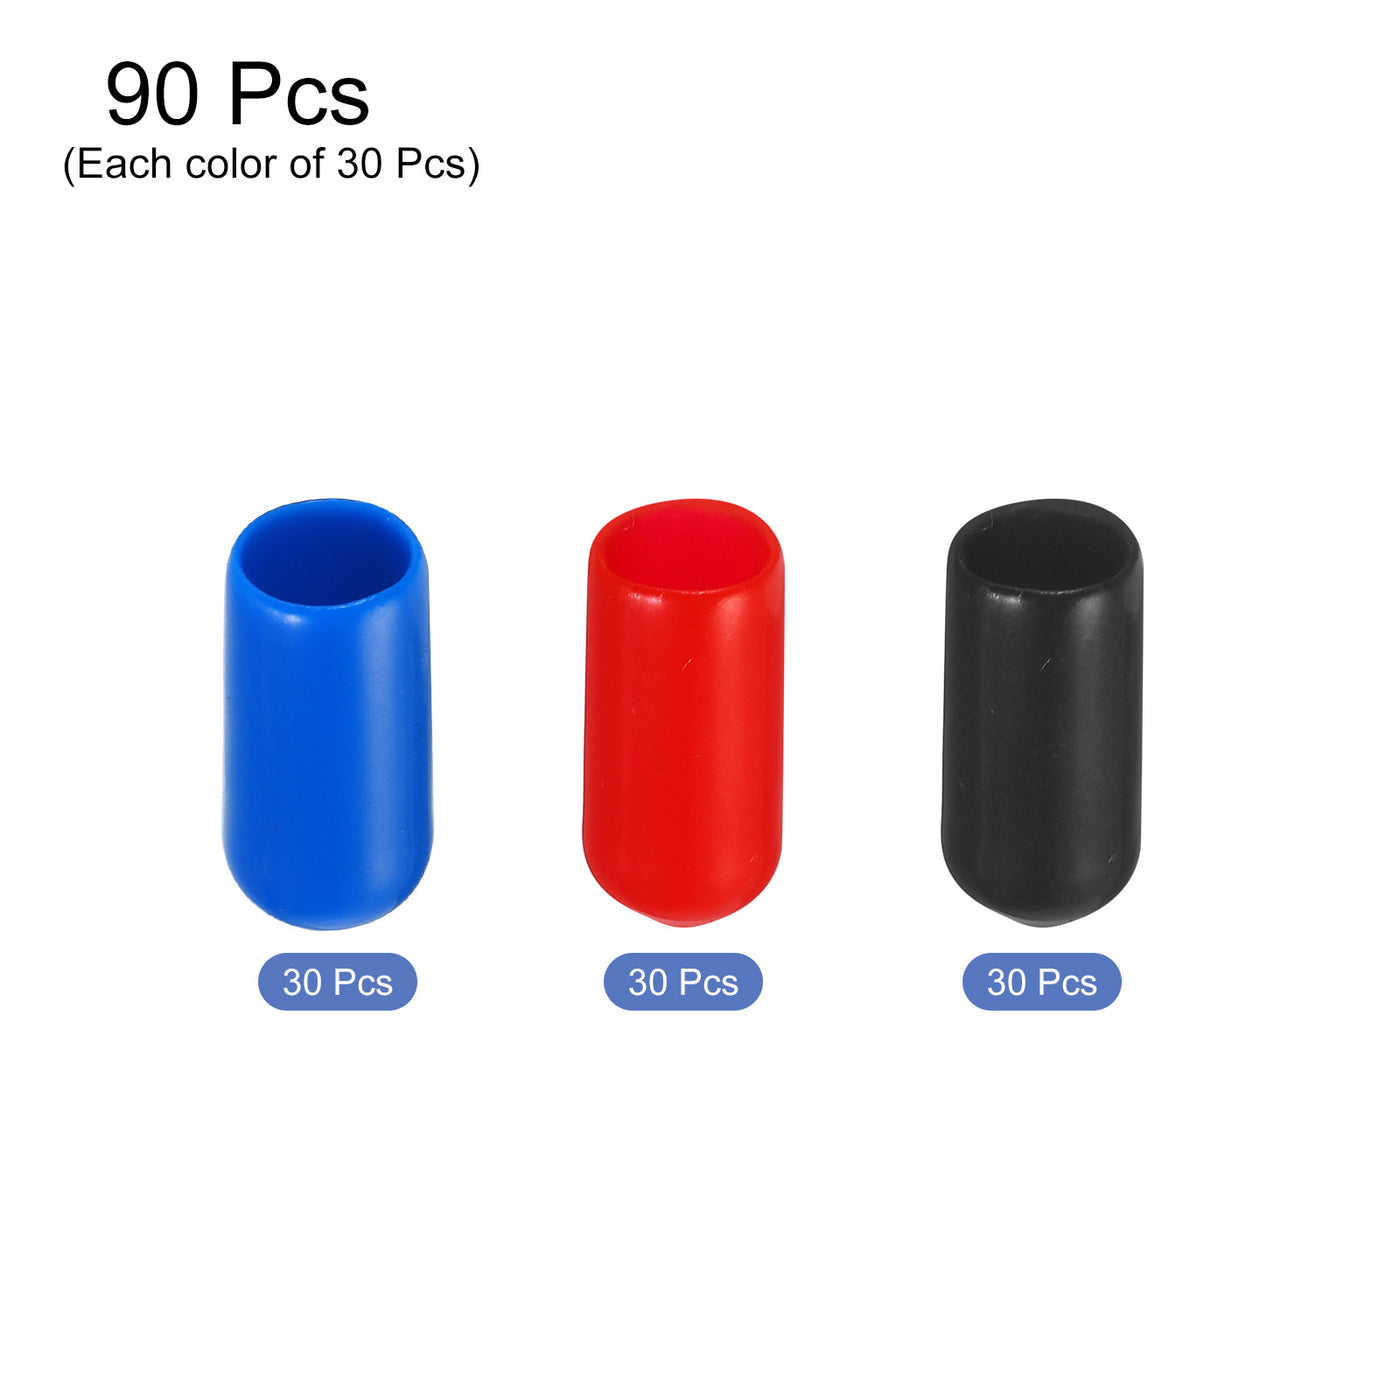 uxcell Uxcell 90pcs Rubber End Caps 7.5mm ID Vinyl PVC Round Tube Bolt Cap Cover Screw Thread Protectors, Black Red Blue